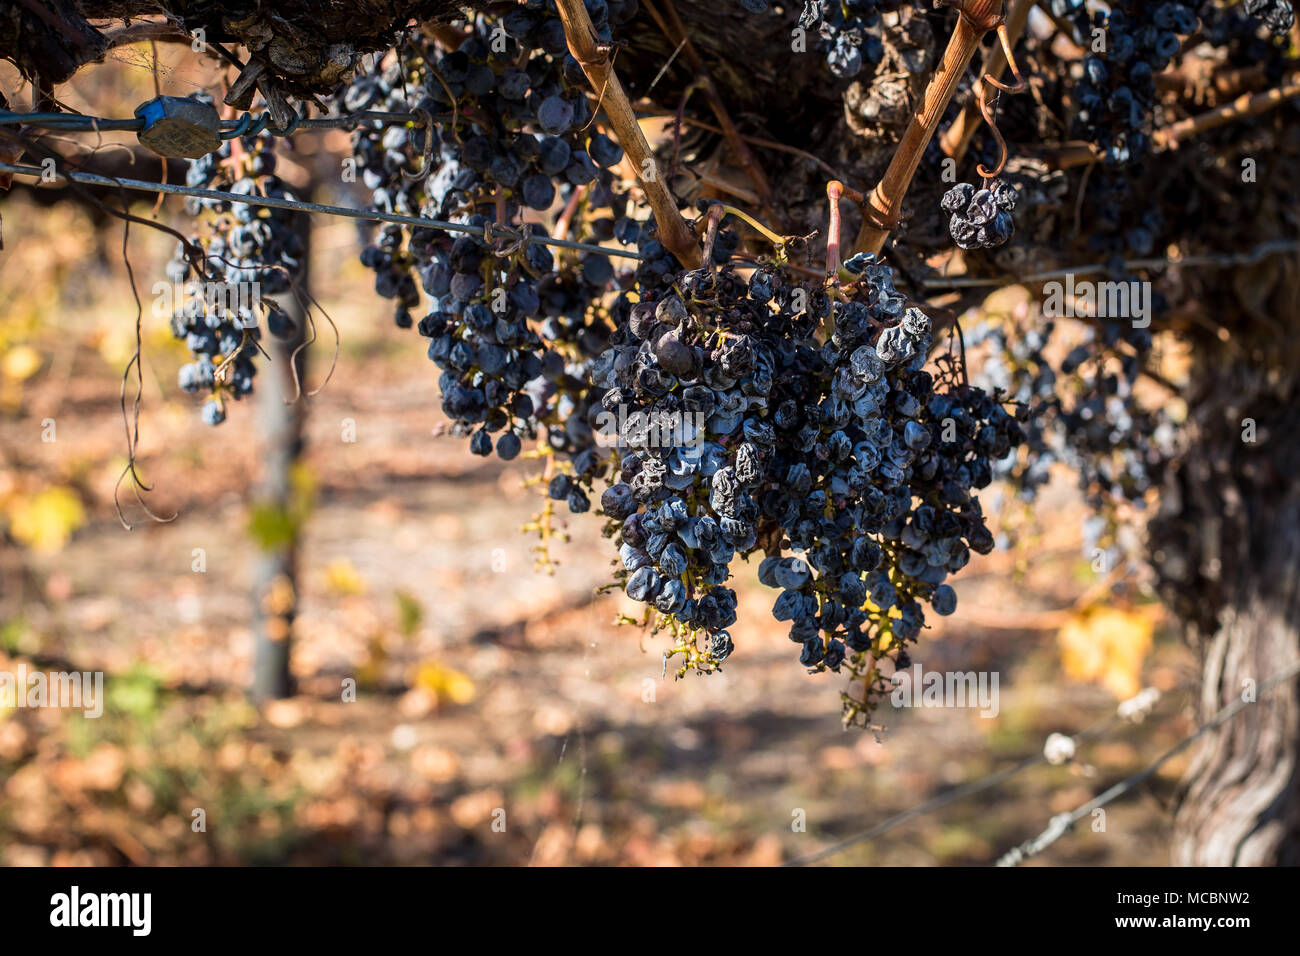 Dried up bunches of black grapes on the vine Stock Photo